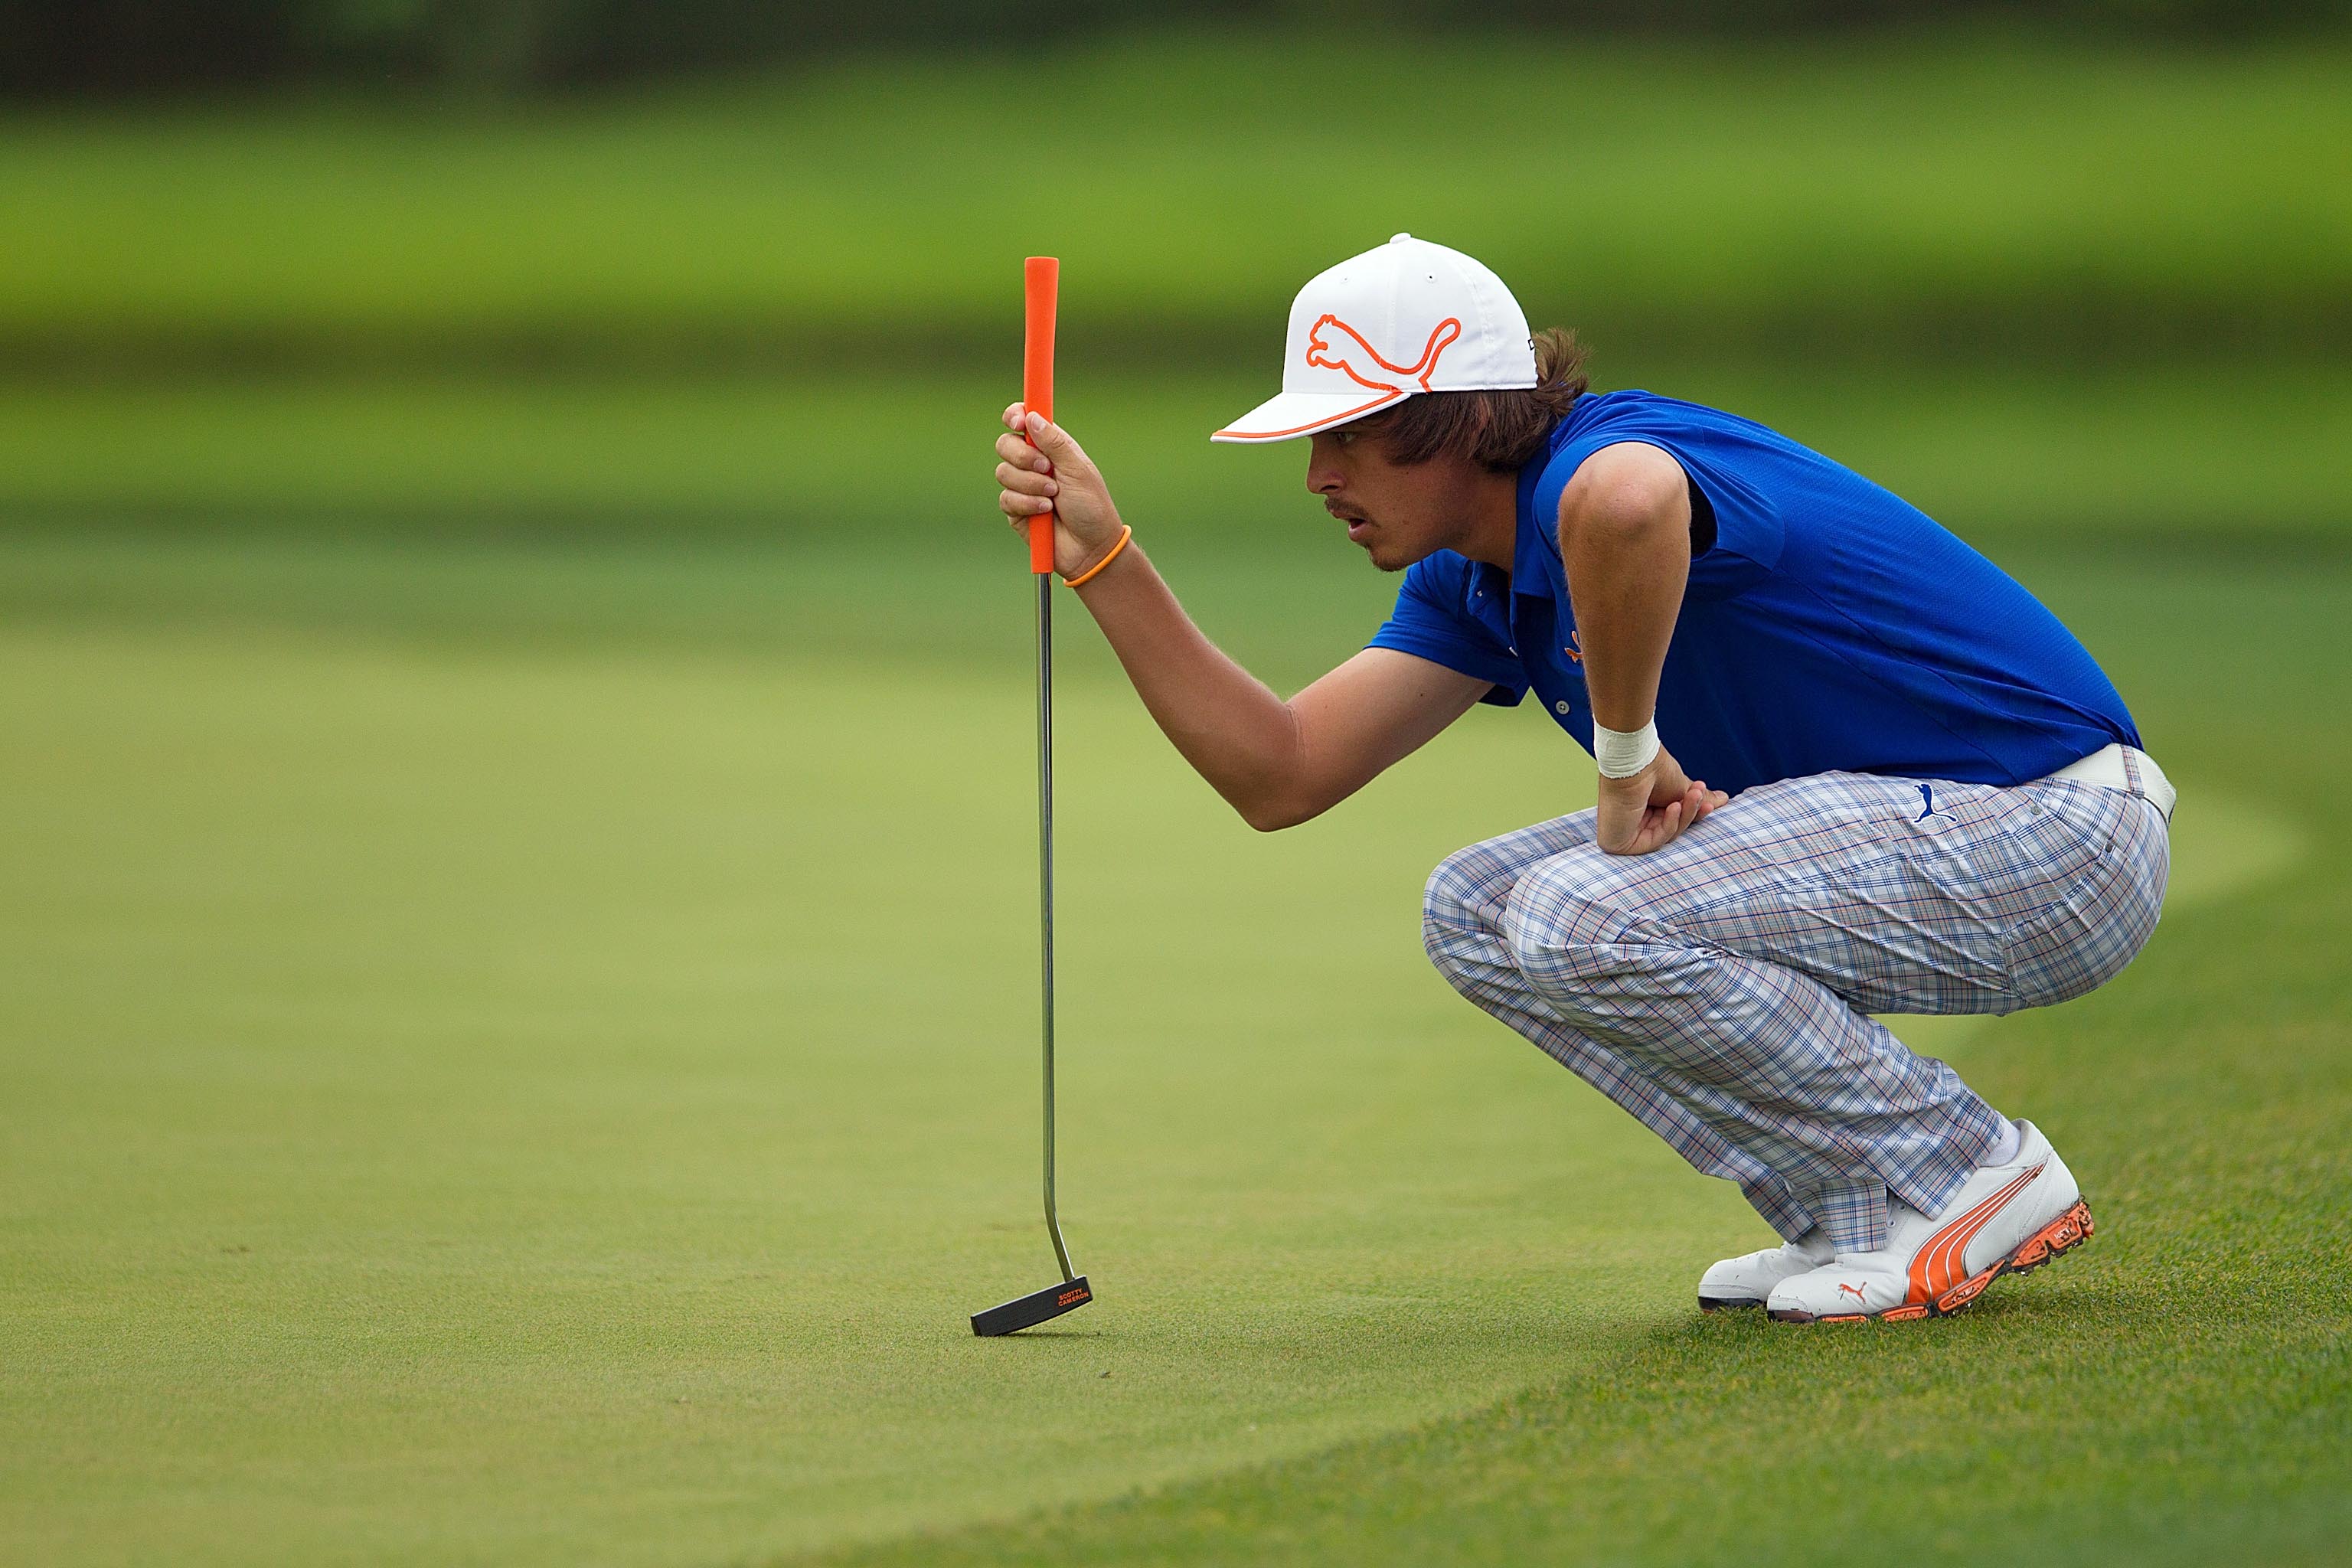 Thoughts On Rickie's Win | Pistols Firing